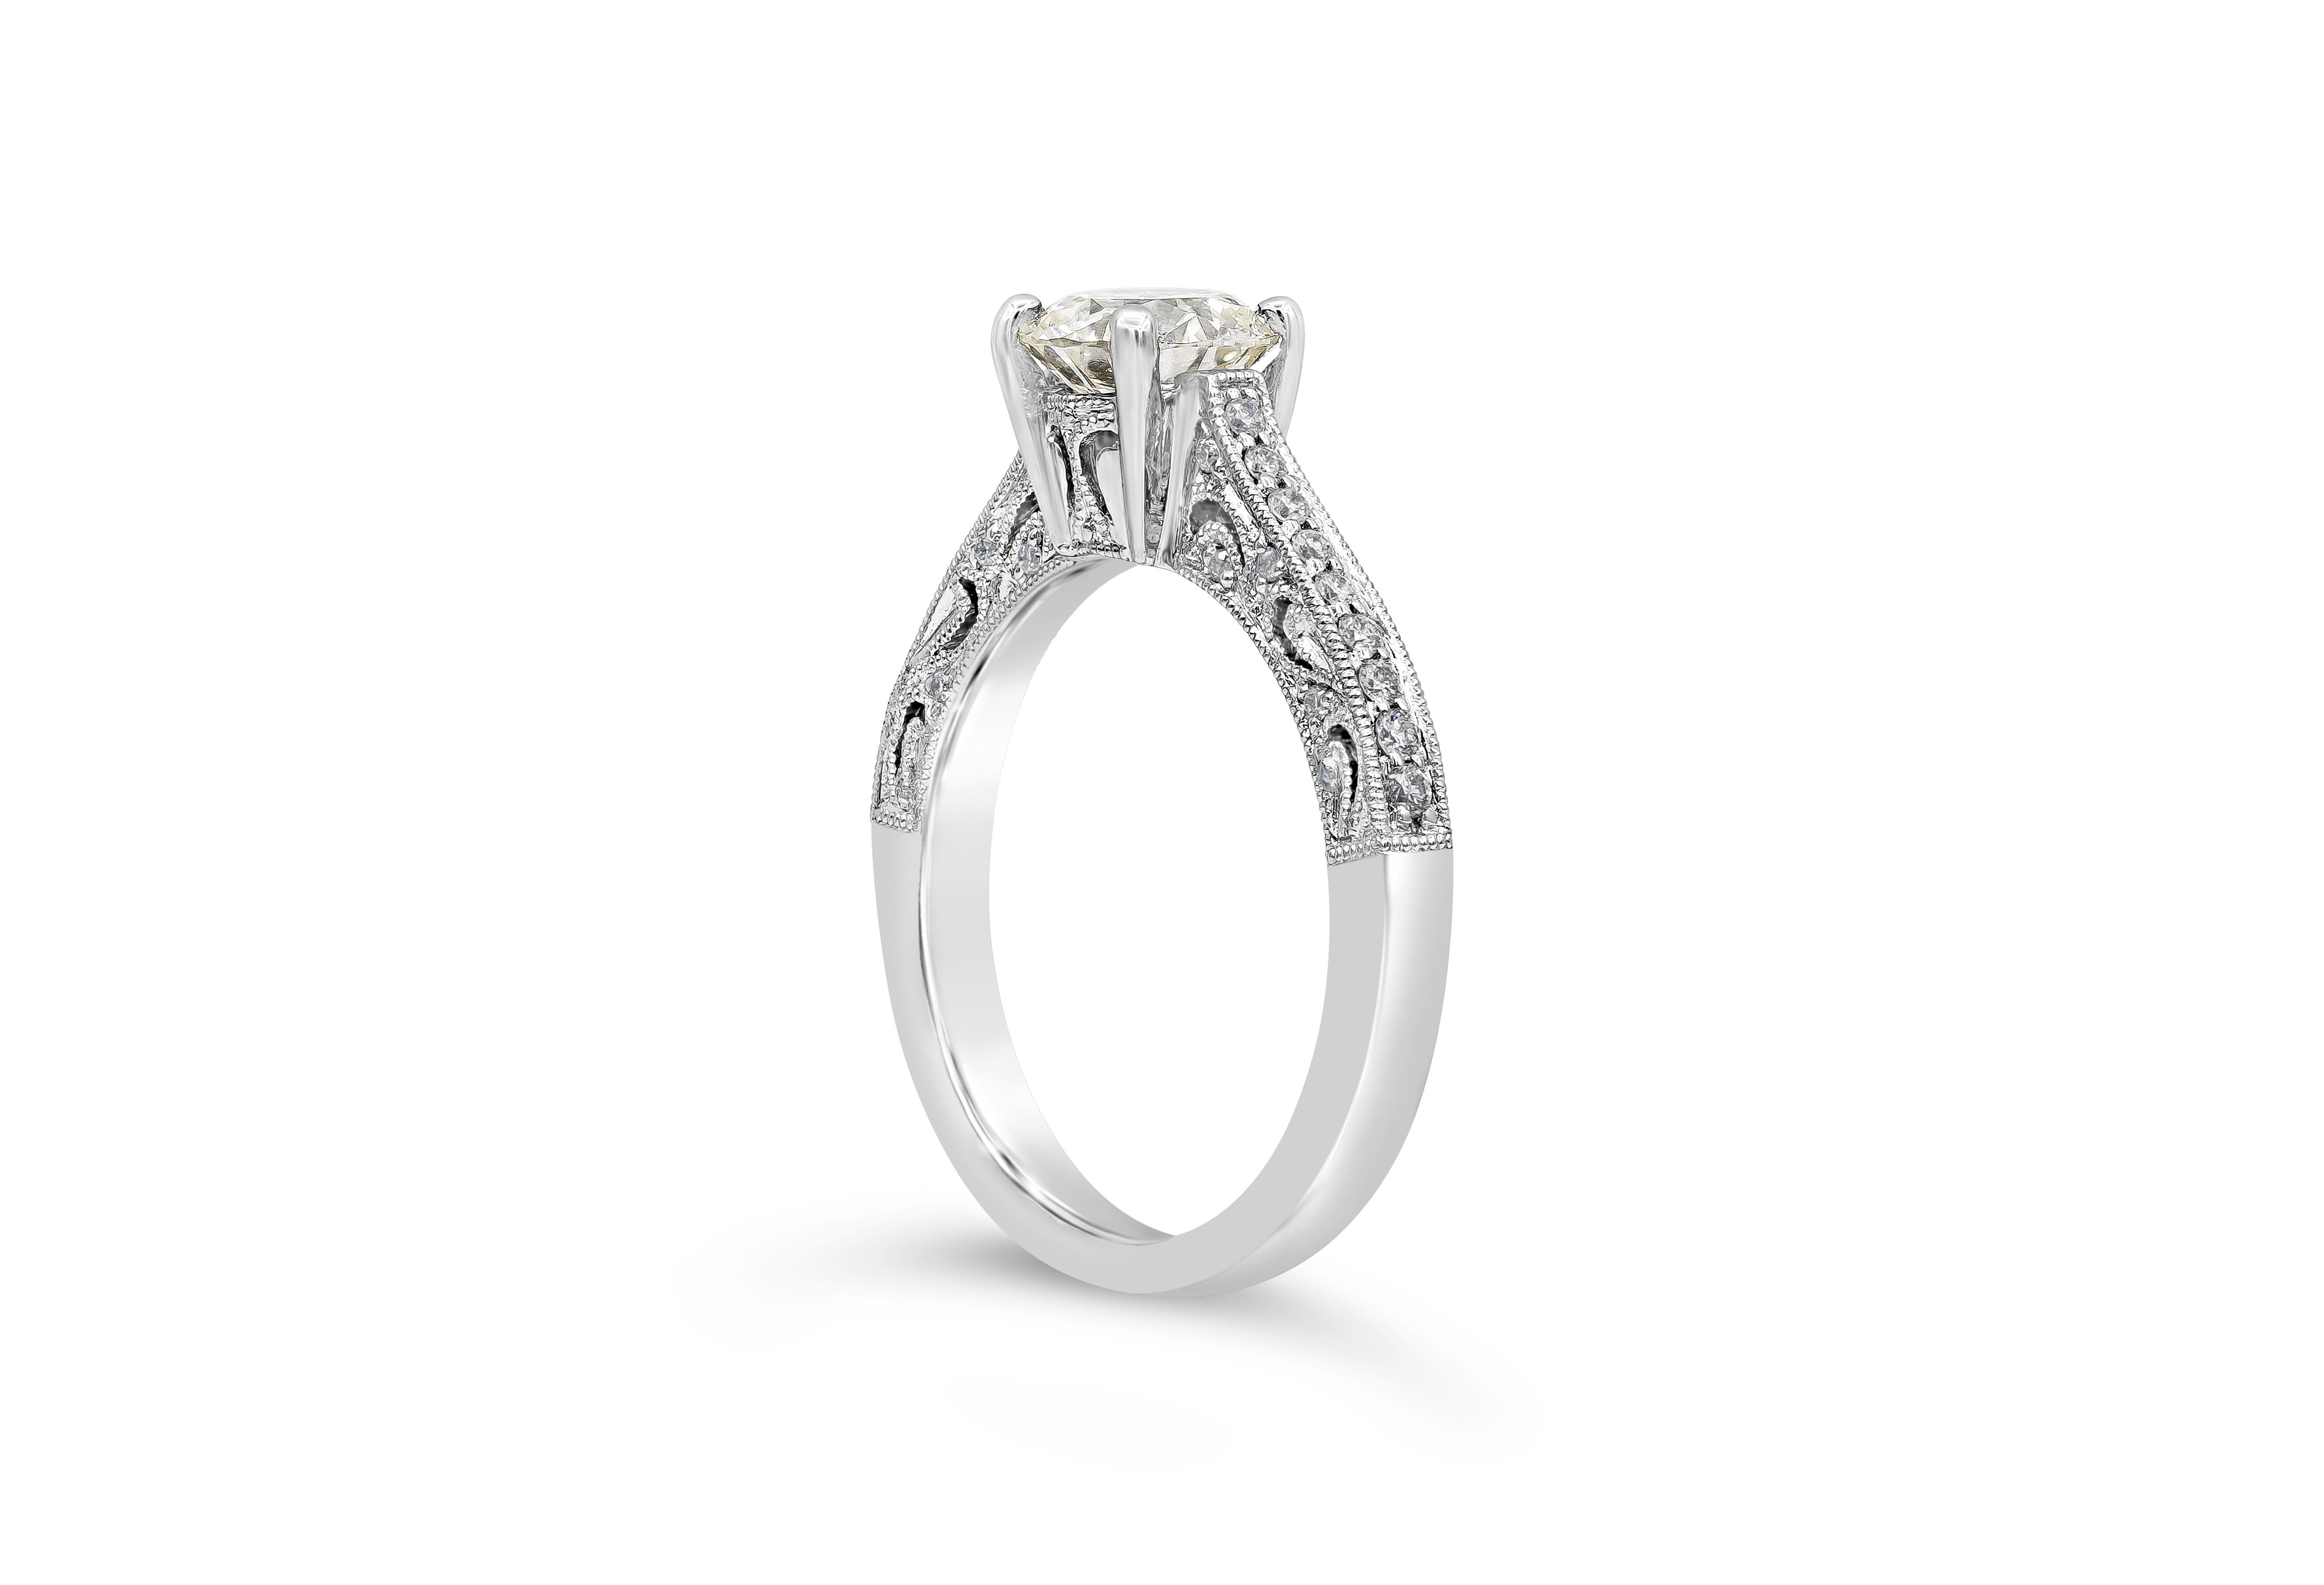 This simple and vintage engagement ring style handcrafted in 18k white gold features a 1.07 carats round brilliant cut diamond certified by GIA as L color and VS2 clarity, accented by smaller round brilliant cut diamonds on either side. Finished